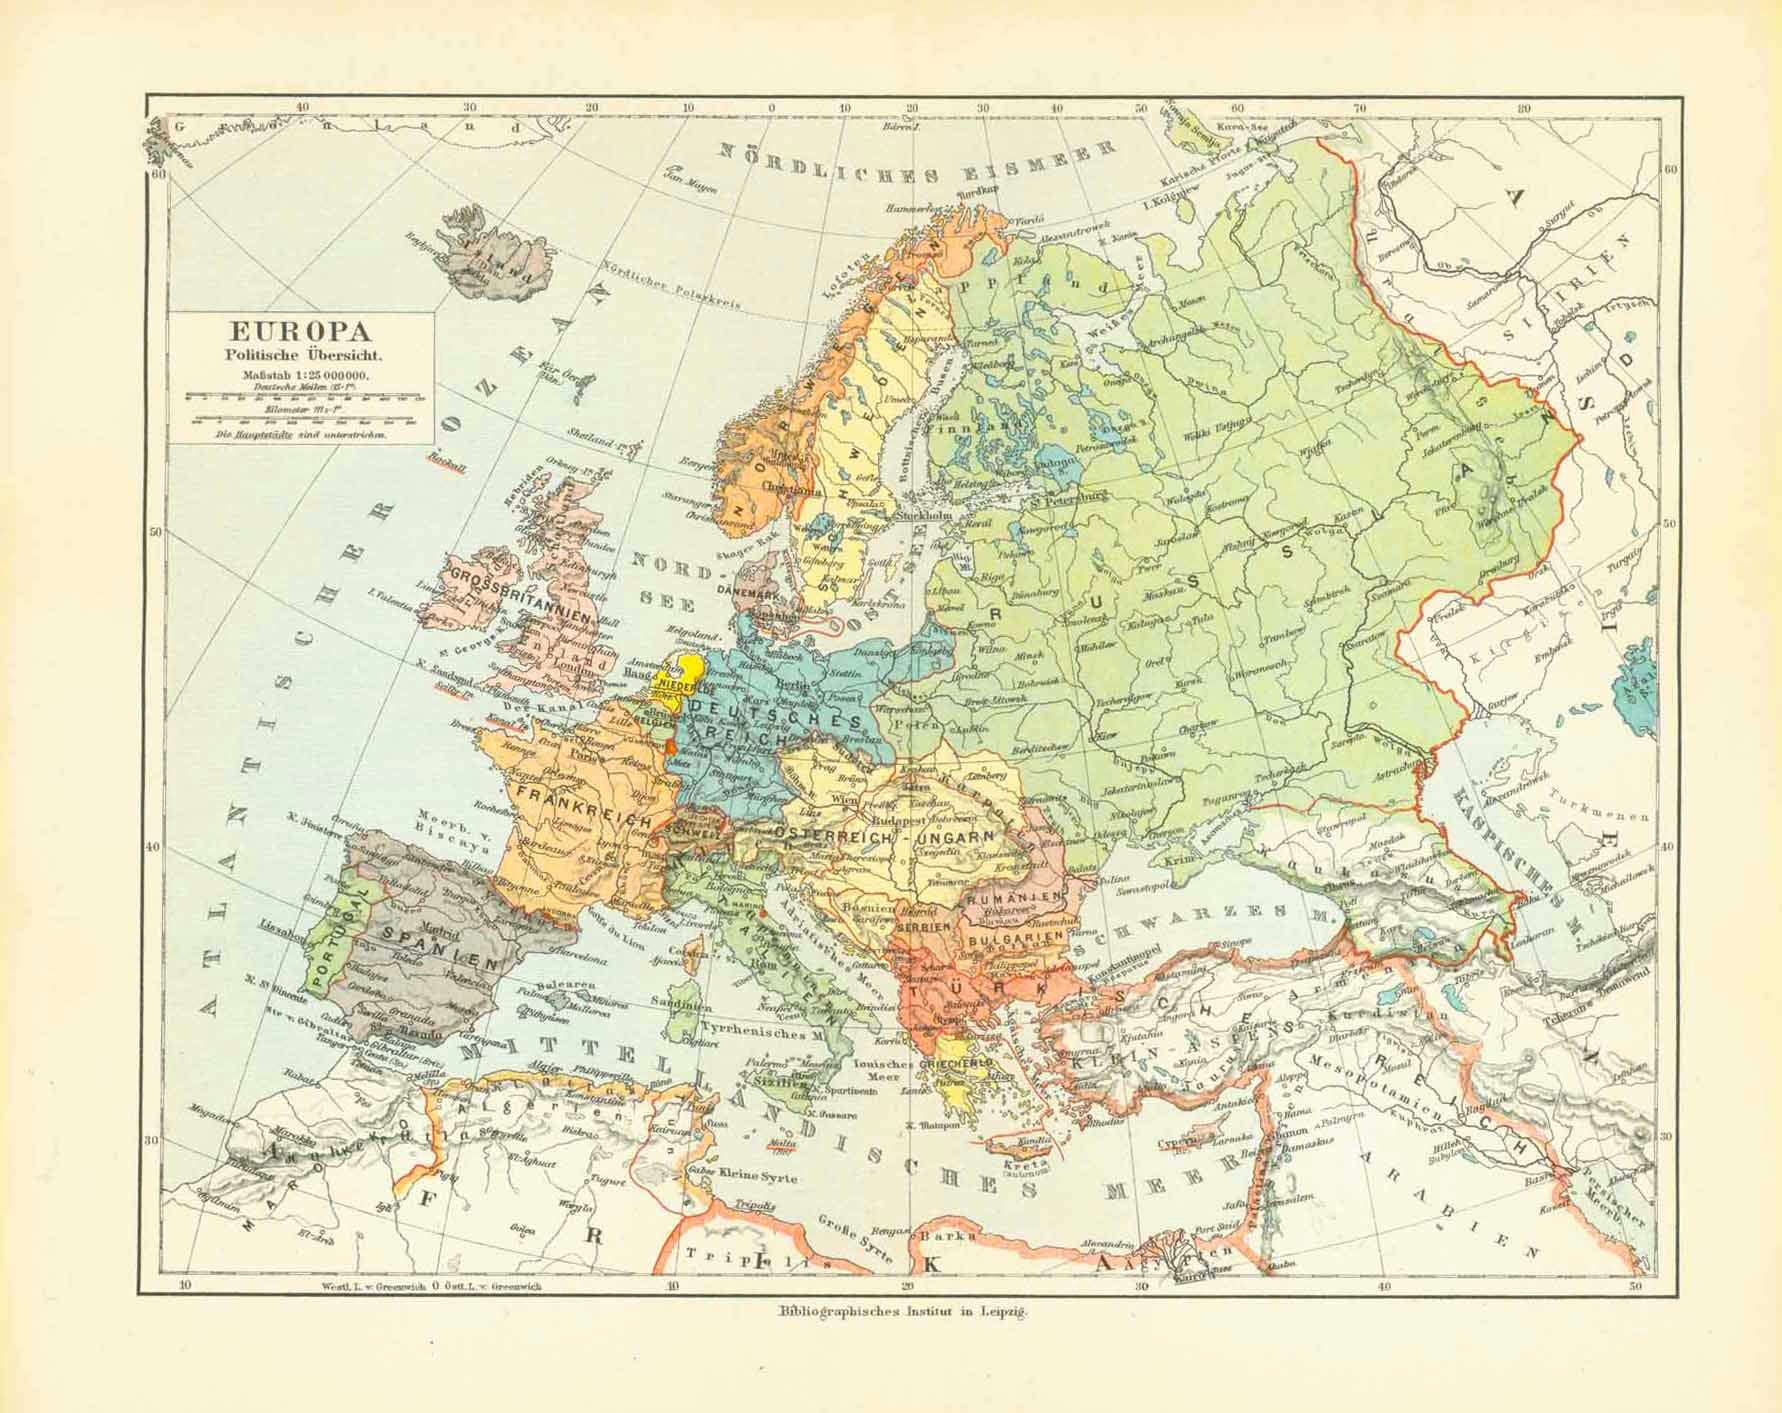 "Europa Politische Uebersicht" (political map of Europe)  Politcal situation of Europe in 1906.  Original antique print , interior design, wall decoration, ideas, idea, gift ideas, present, vintage, charming, special, decoration, home interior, living room design